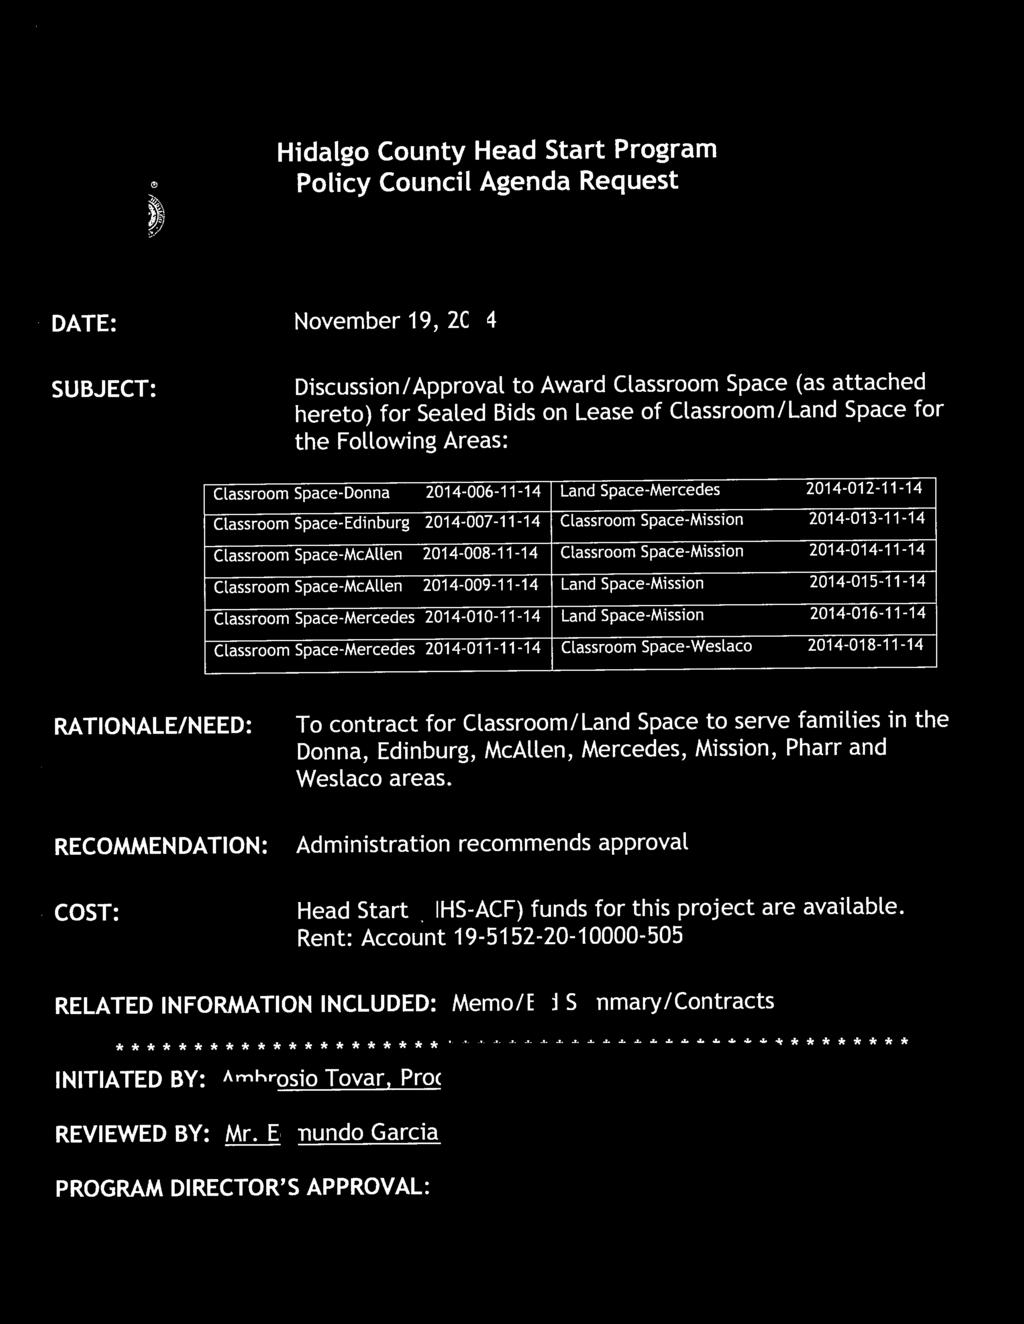 Hidalgo County Head Start Program Policy Council Agenda Request DATE: November 19, 2014 SUBJECT: Discussion/ Approval to Award Classroom Space (as attached hereto) for Sealed Bids on Lease of